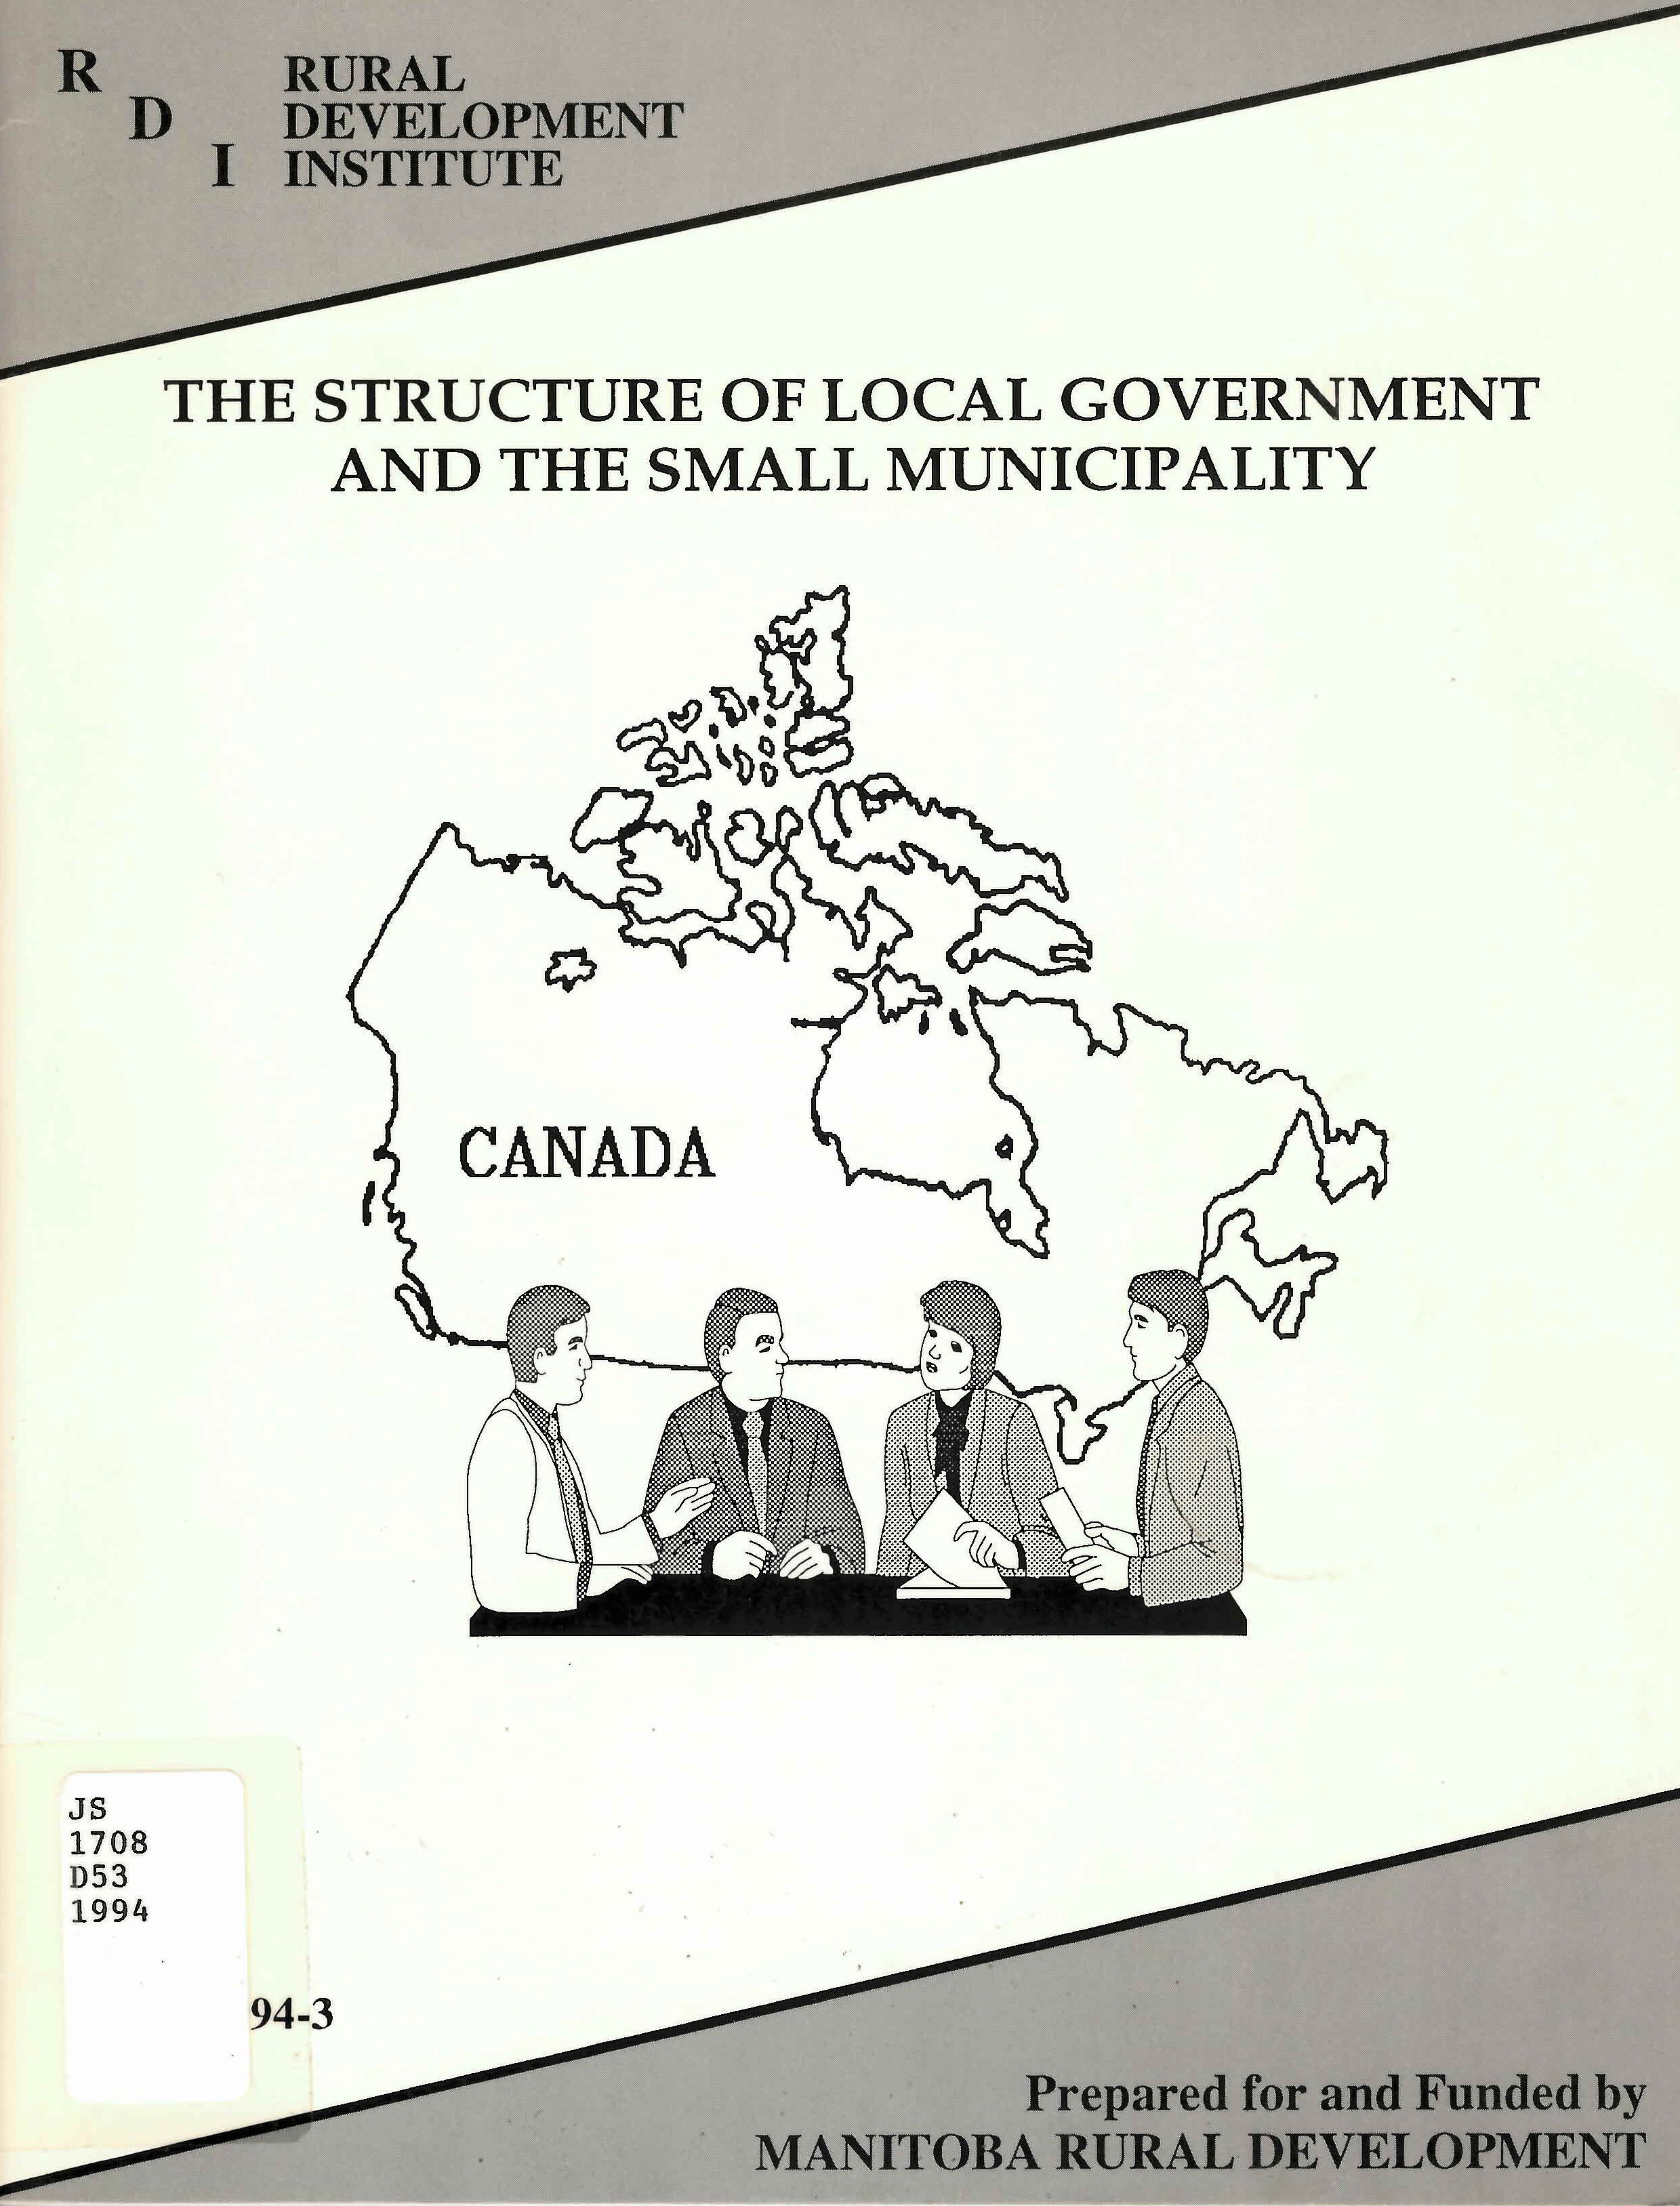 The structure of local government and the small municipality